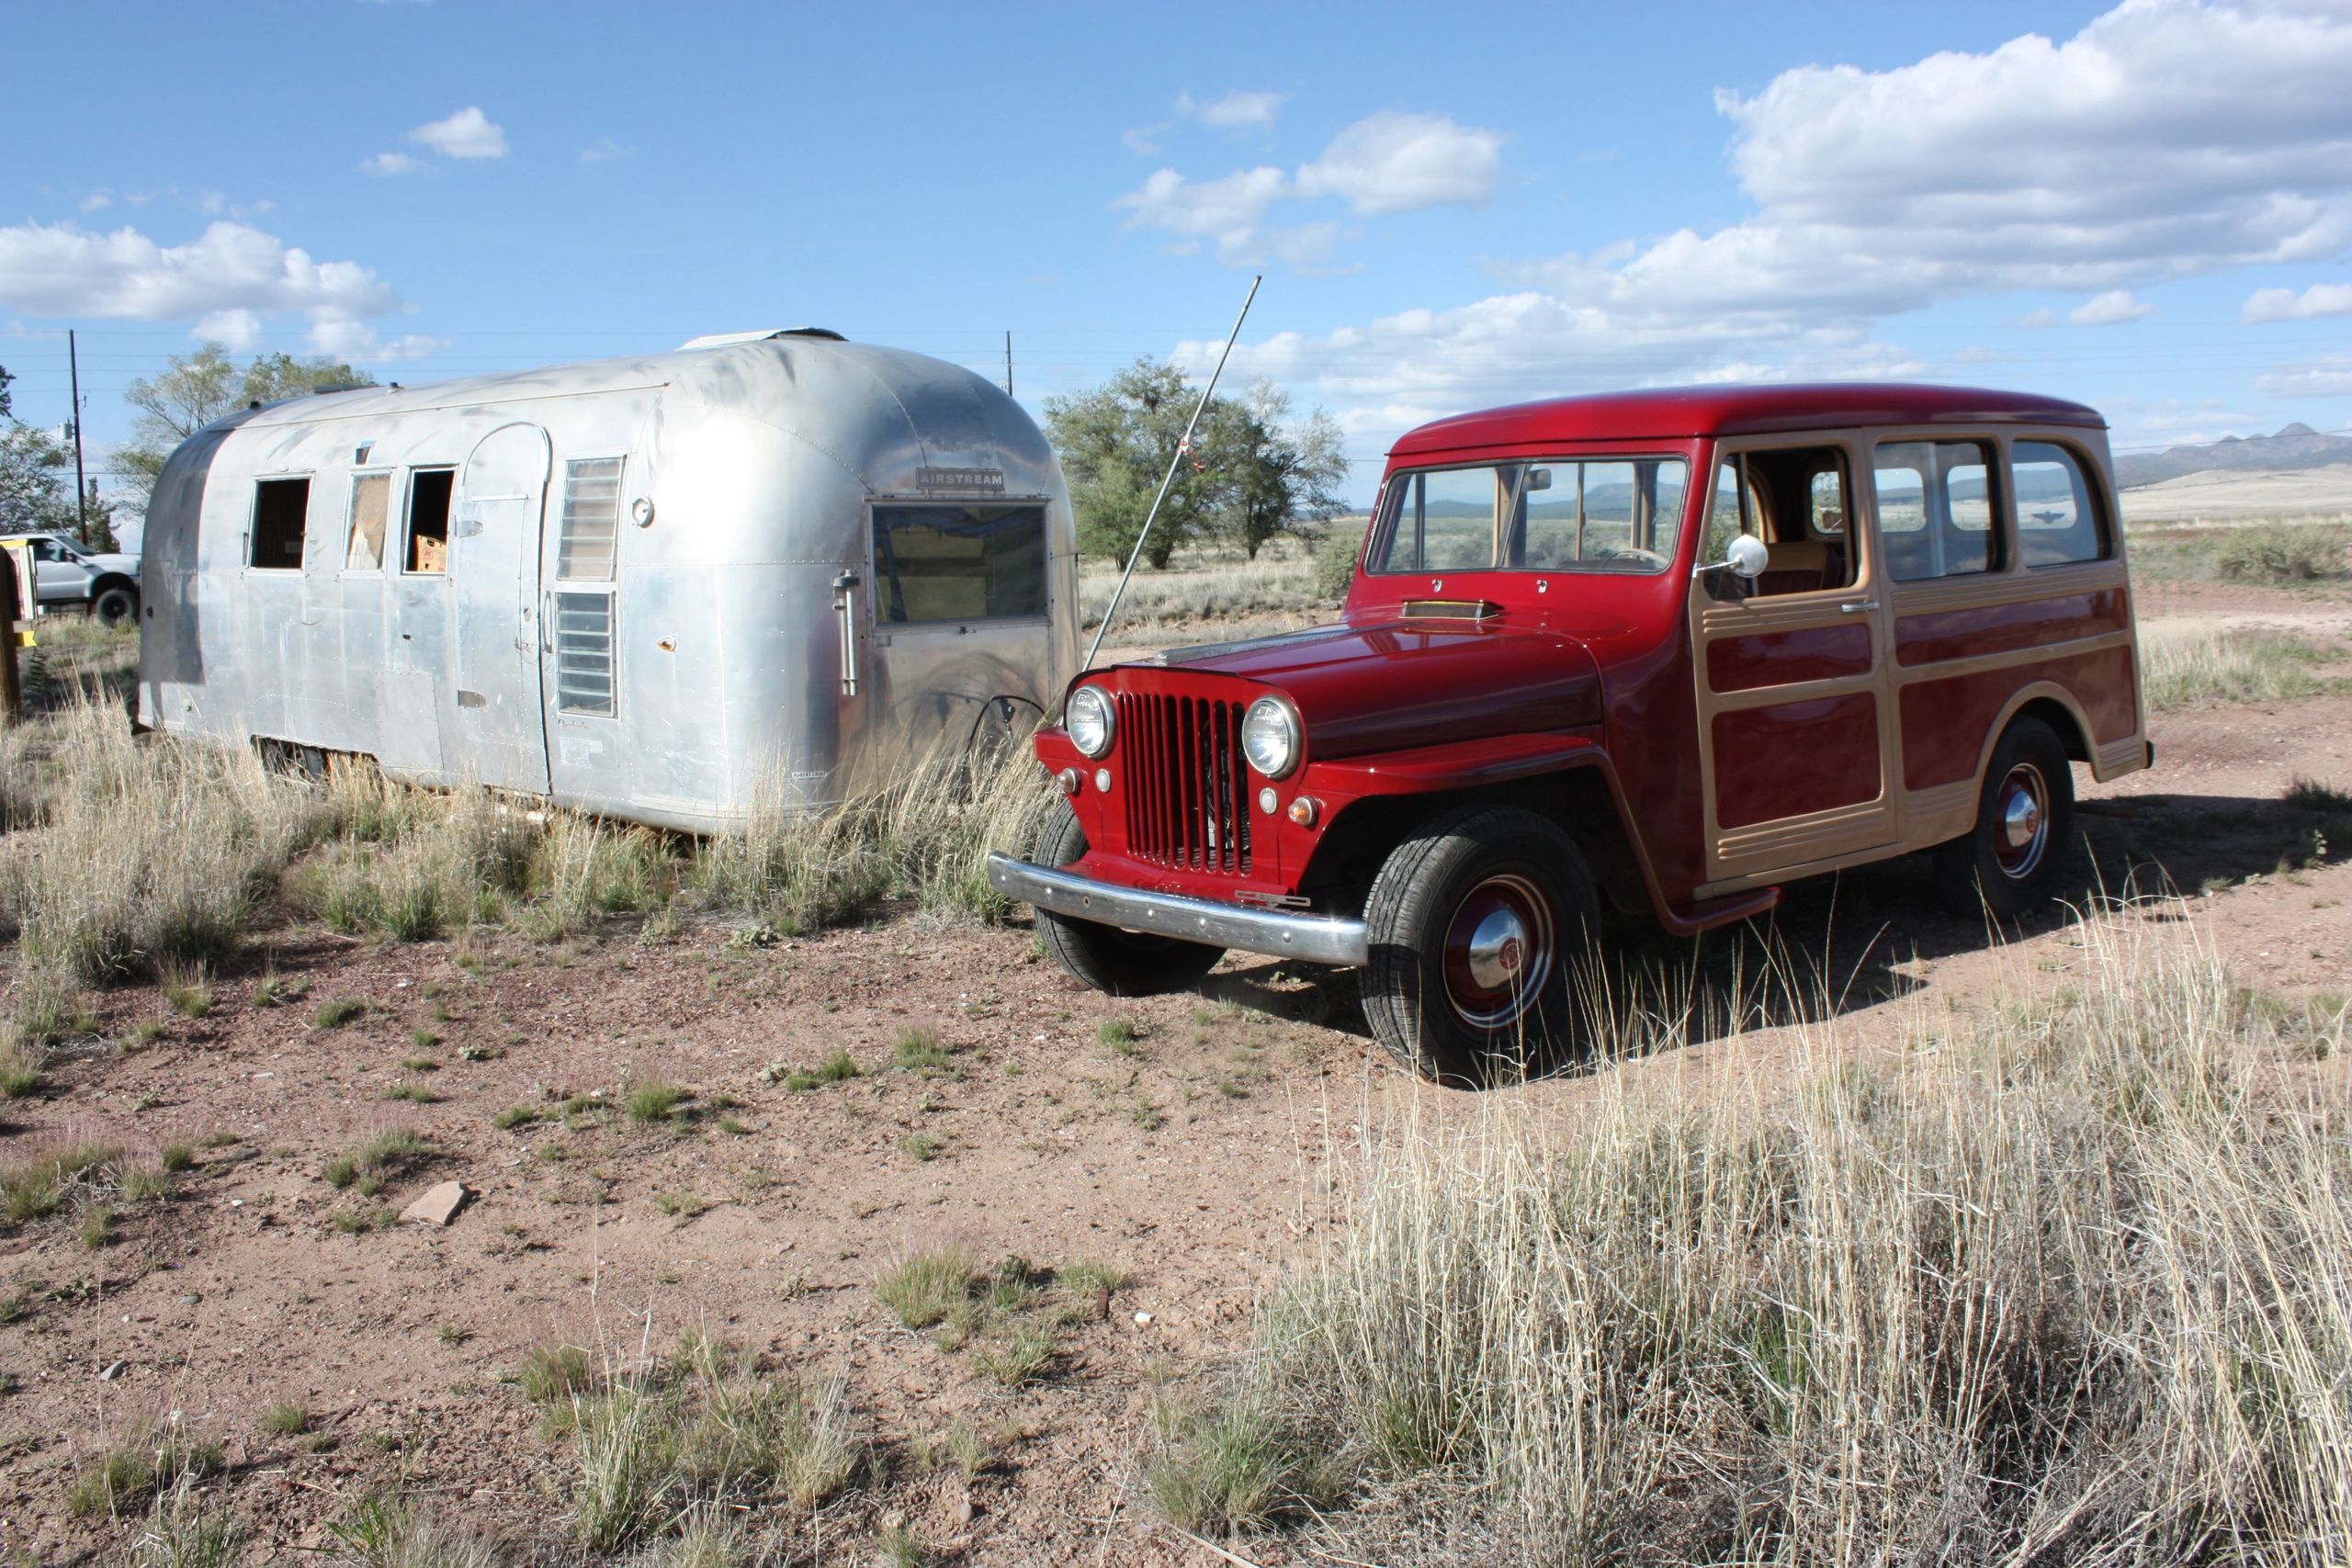 Route 66 trip. 1946 Willys Wagon and vintage Airstream trailer on historic Route 66 Seligman, Arizon